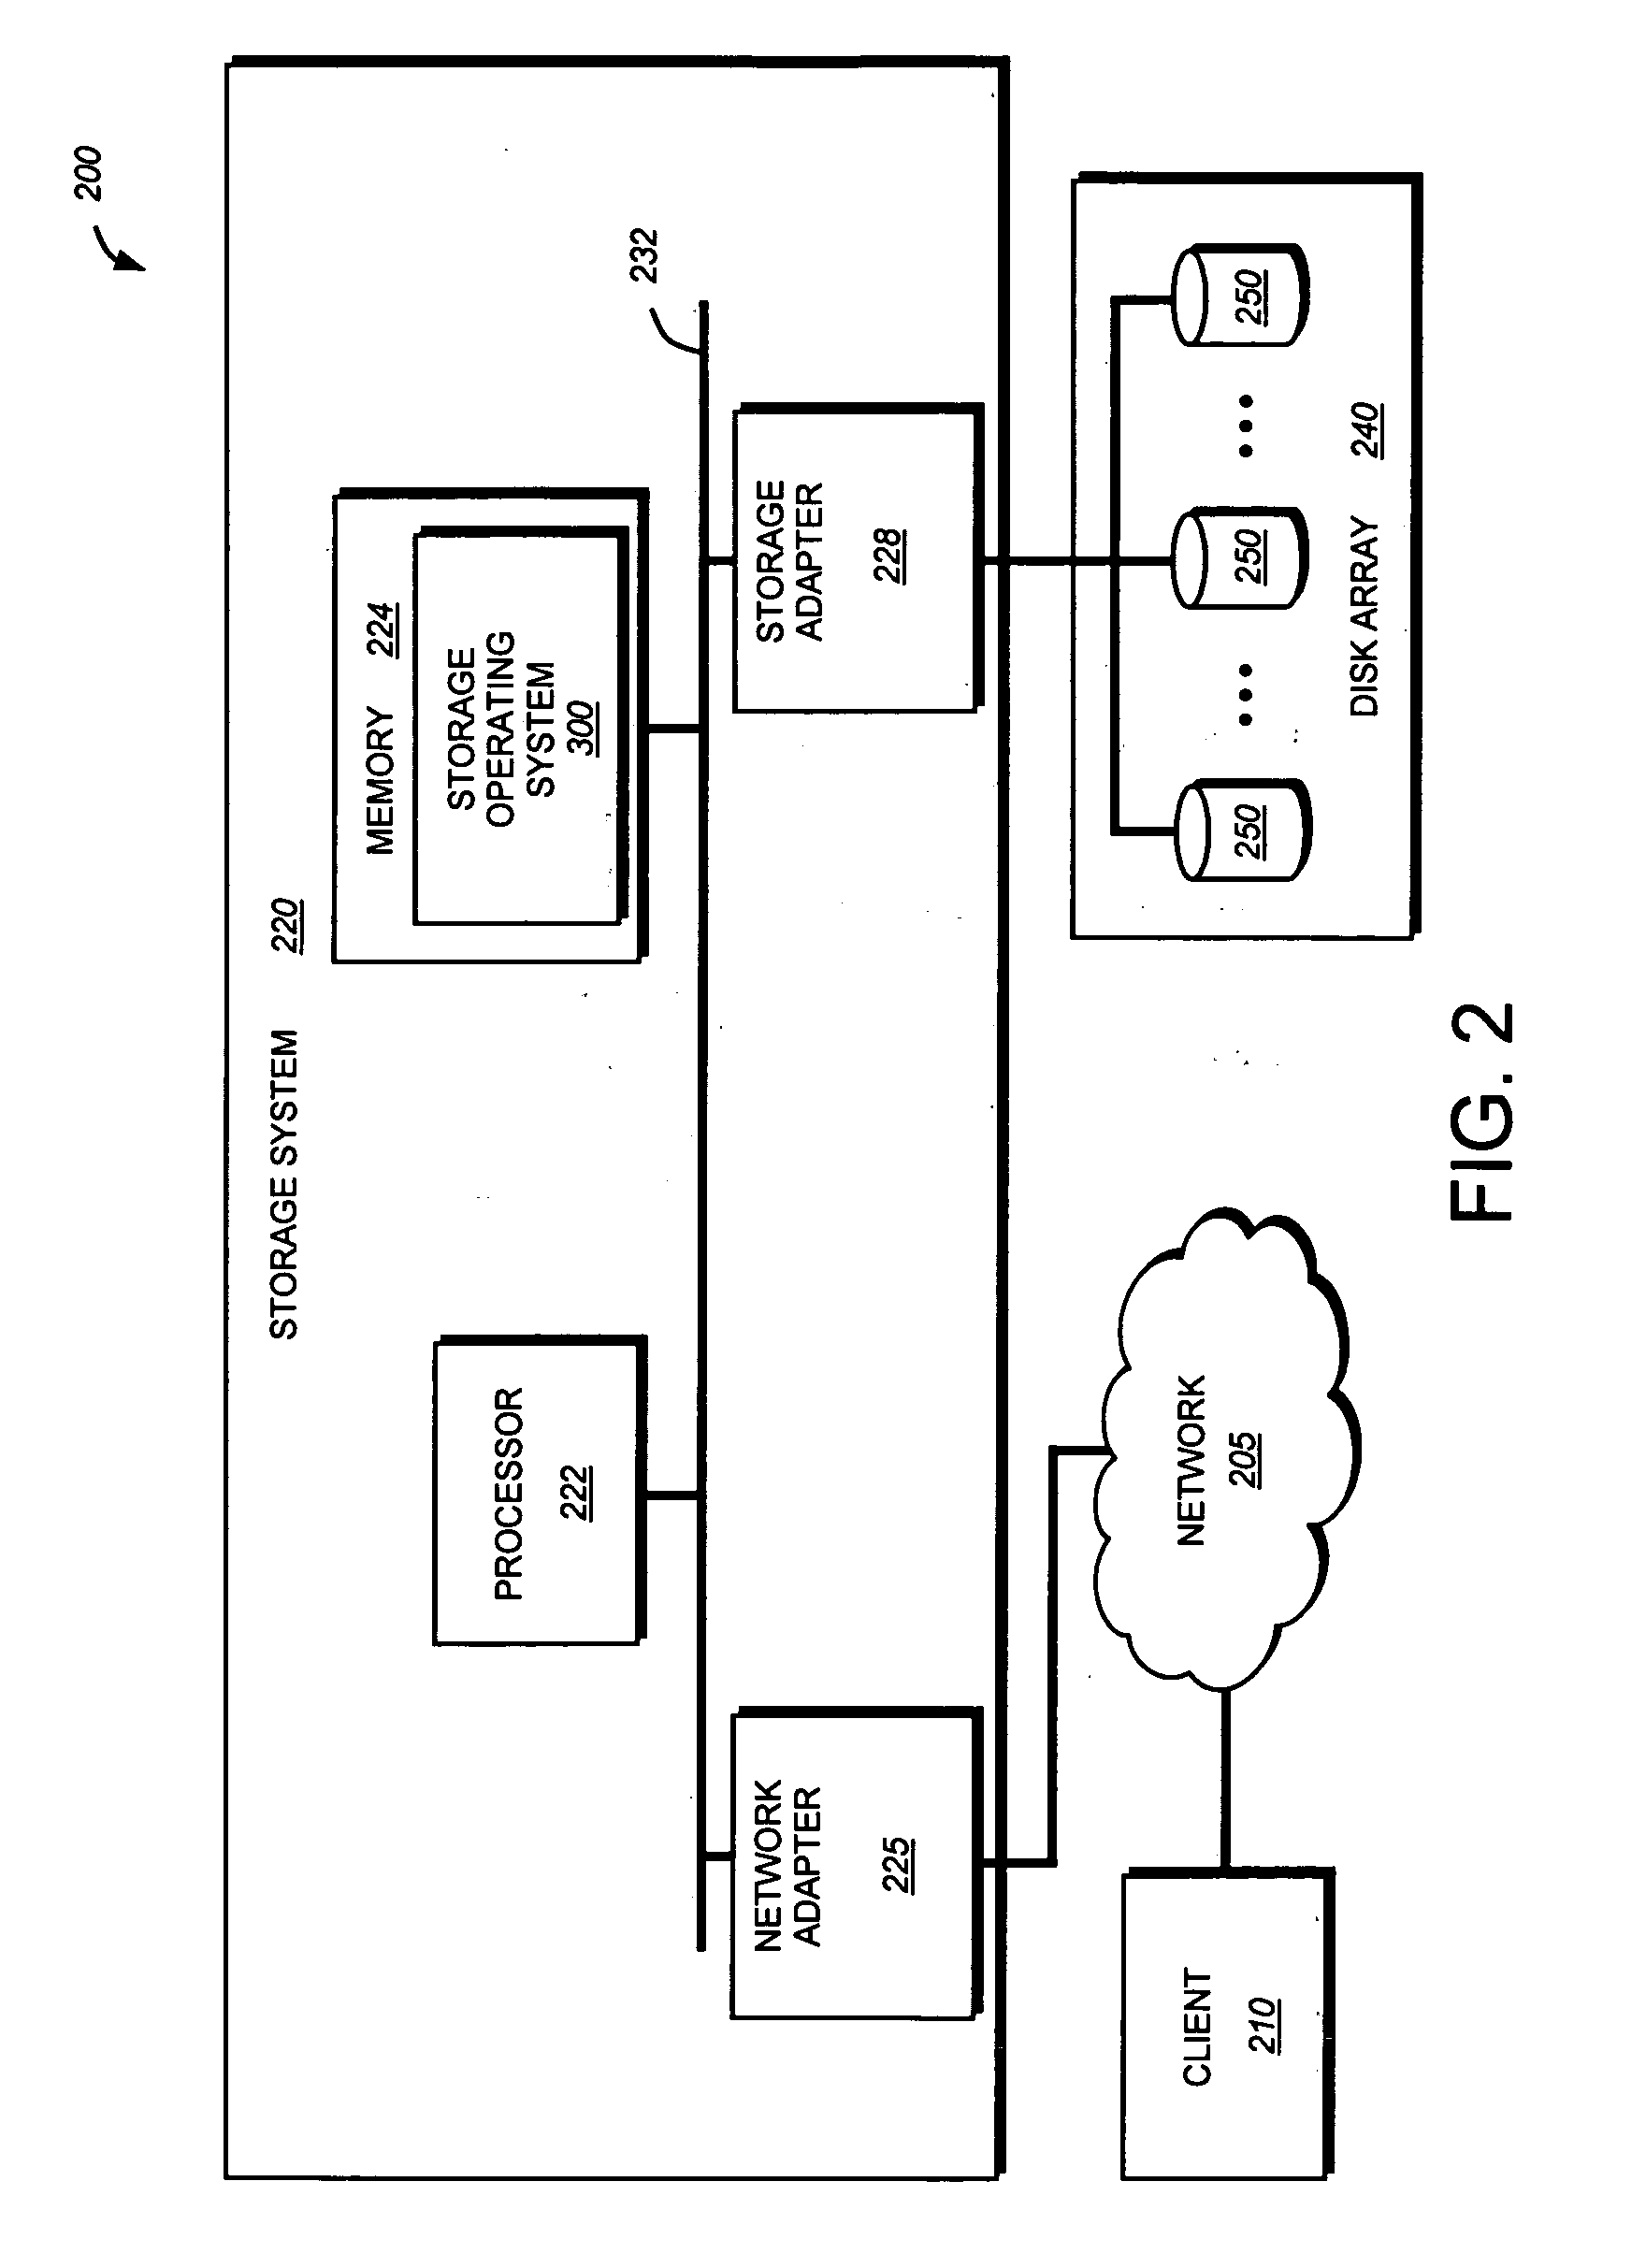 Triple parity technique for enabling efficient recovery from triple failures in a storage array